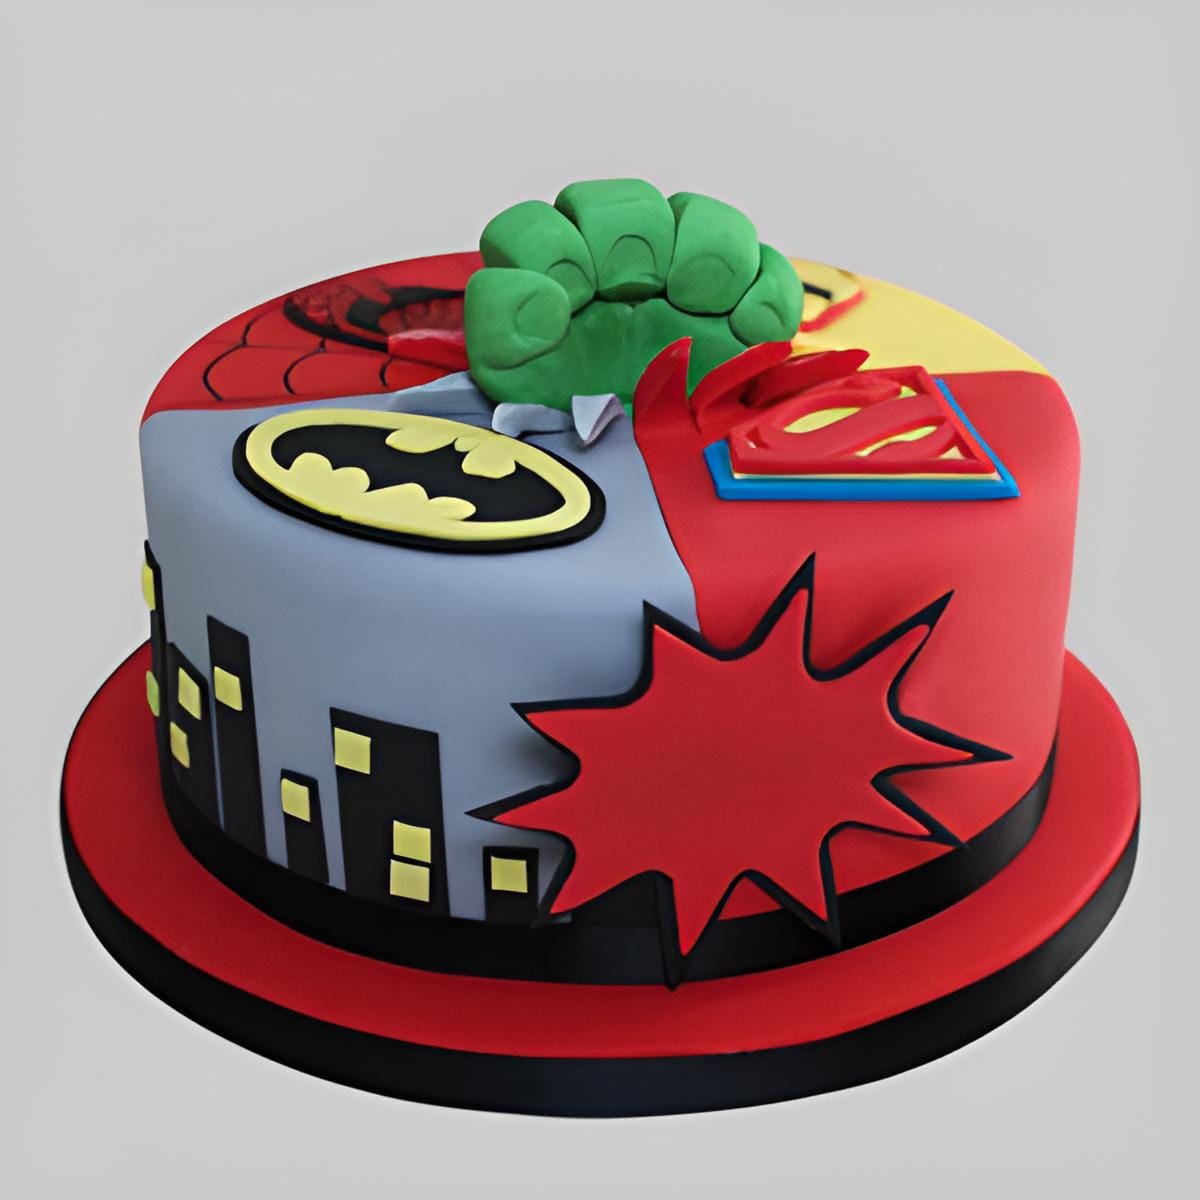 Avengers Birthday Cake Ideas Images (Pictures) | Avengers birthday cakes, Avengers  cake design, Superhero birthday cake